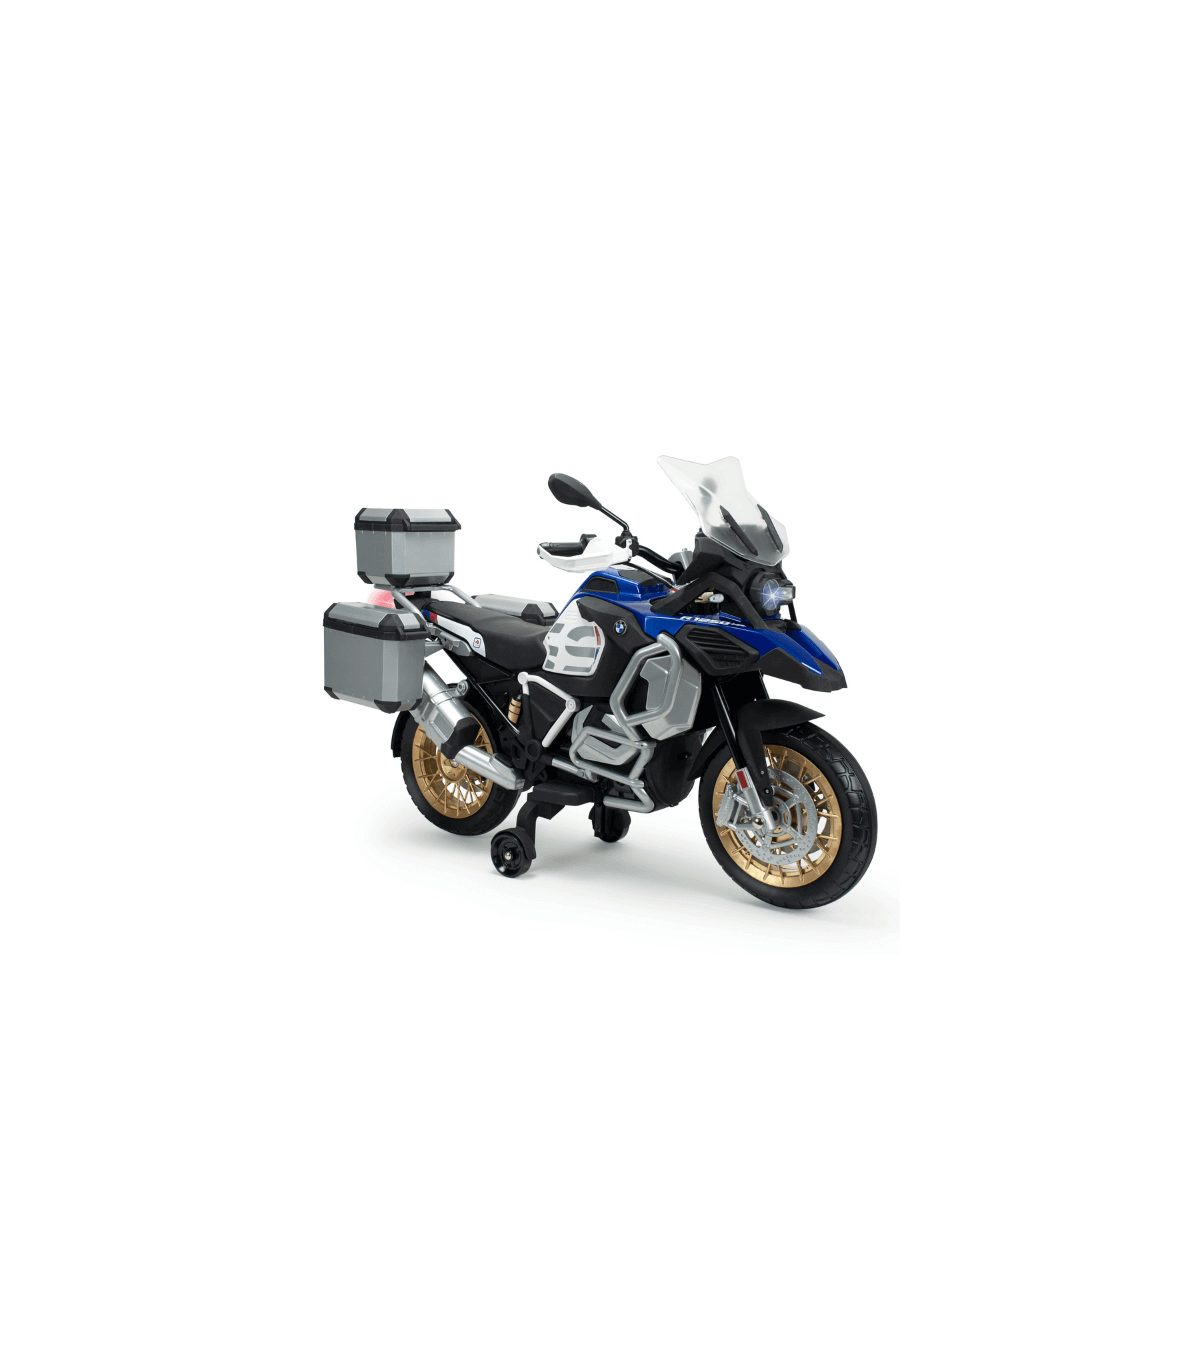 BMW R1250 GS Adventure 12V Children's Motorbike with Integrated Panniers